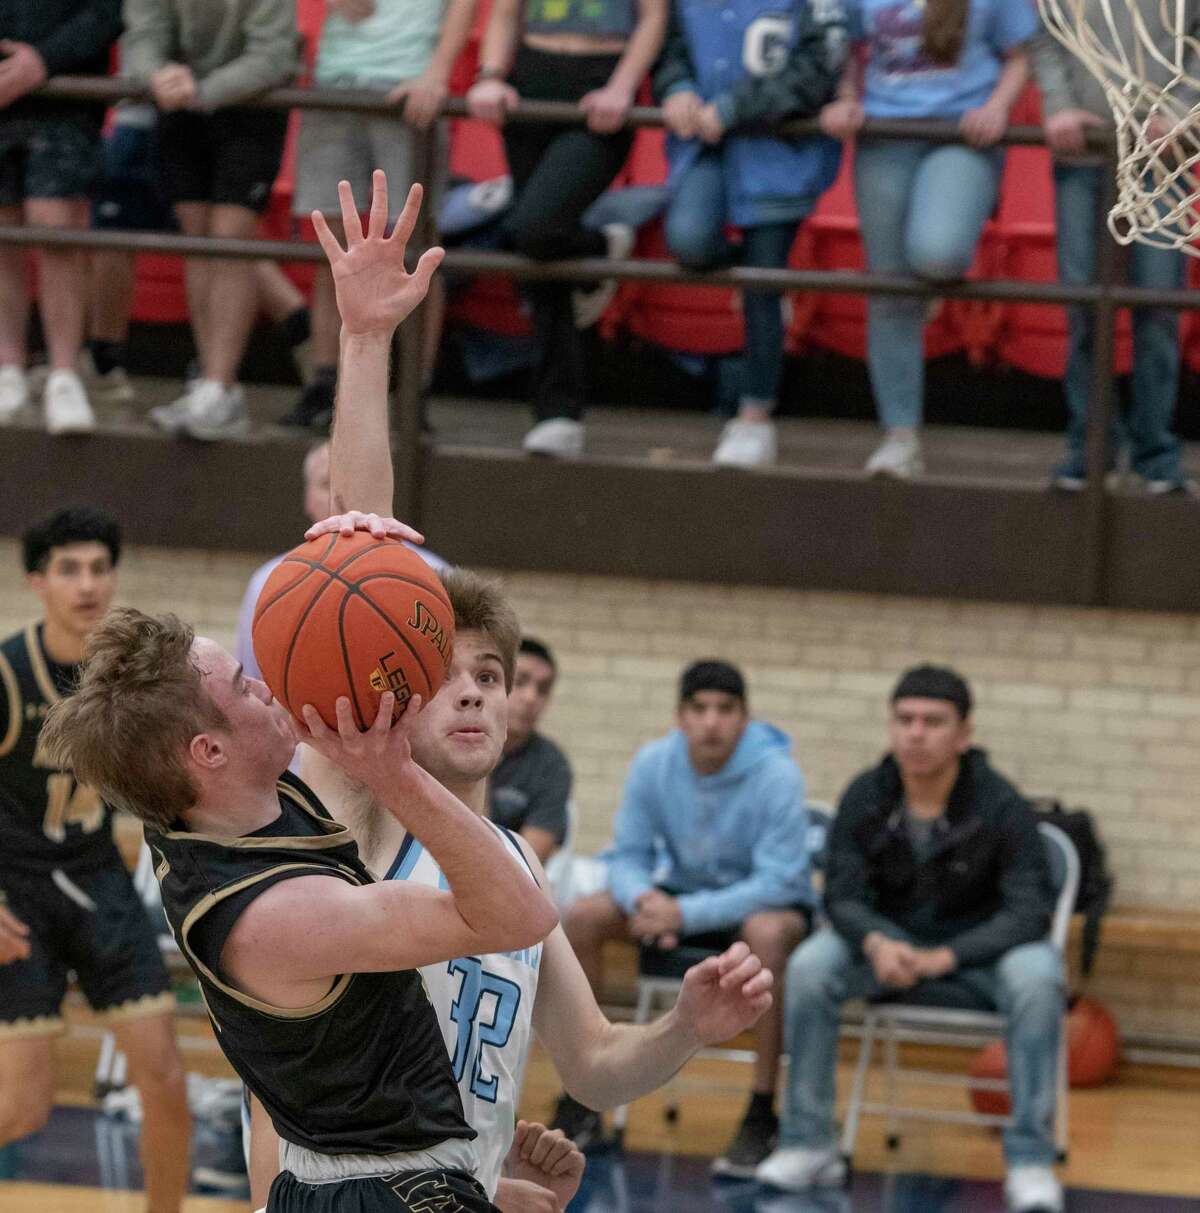 Andrews' Jerod Cargill tries to put up a shot as Greenwood's Colton Callicoatte tries to block it 02/11/2022 at Greenwood High gym. Tim Fischer/Reporter-Telegram